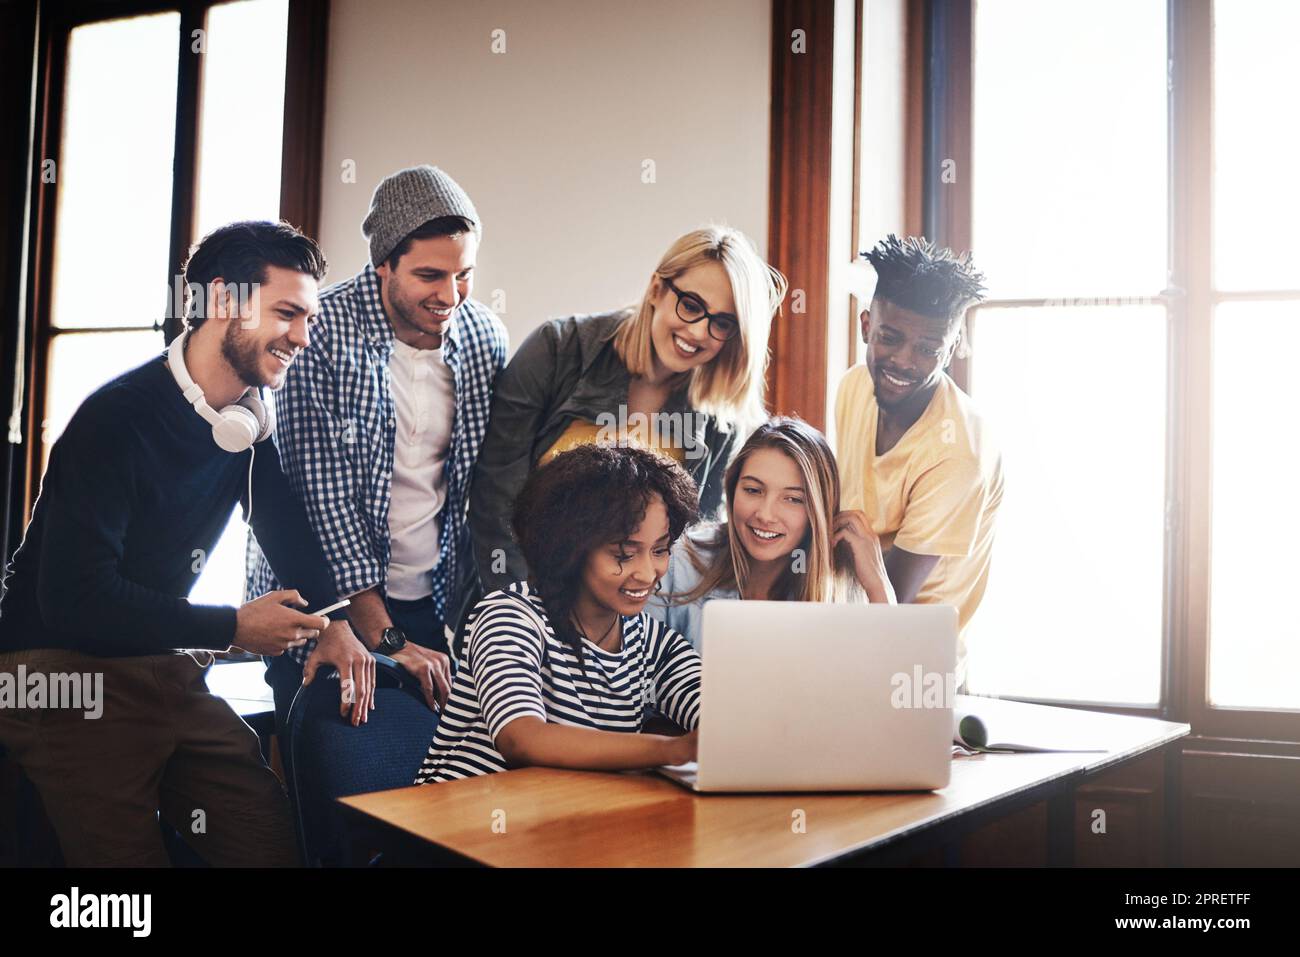 Going over the new assignment together. a group of university students working on an assignment together in class. Stock Photo